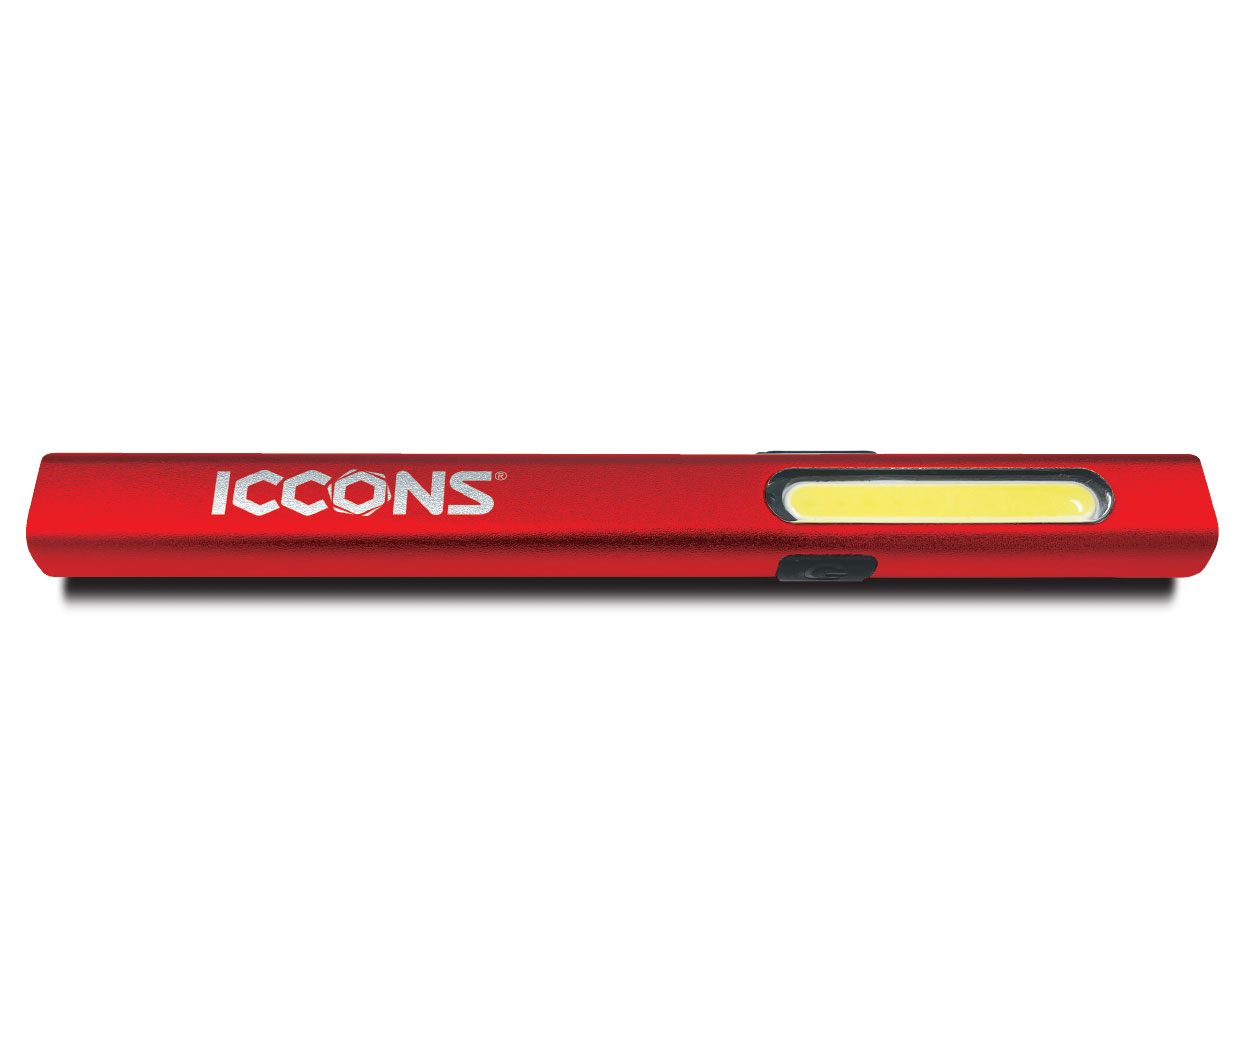 ICCONS Rechargeable Penlight